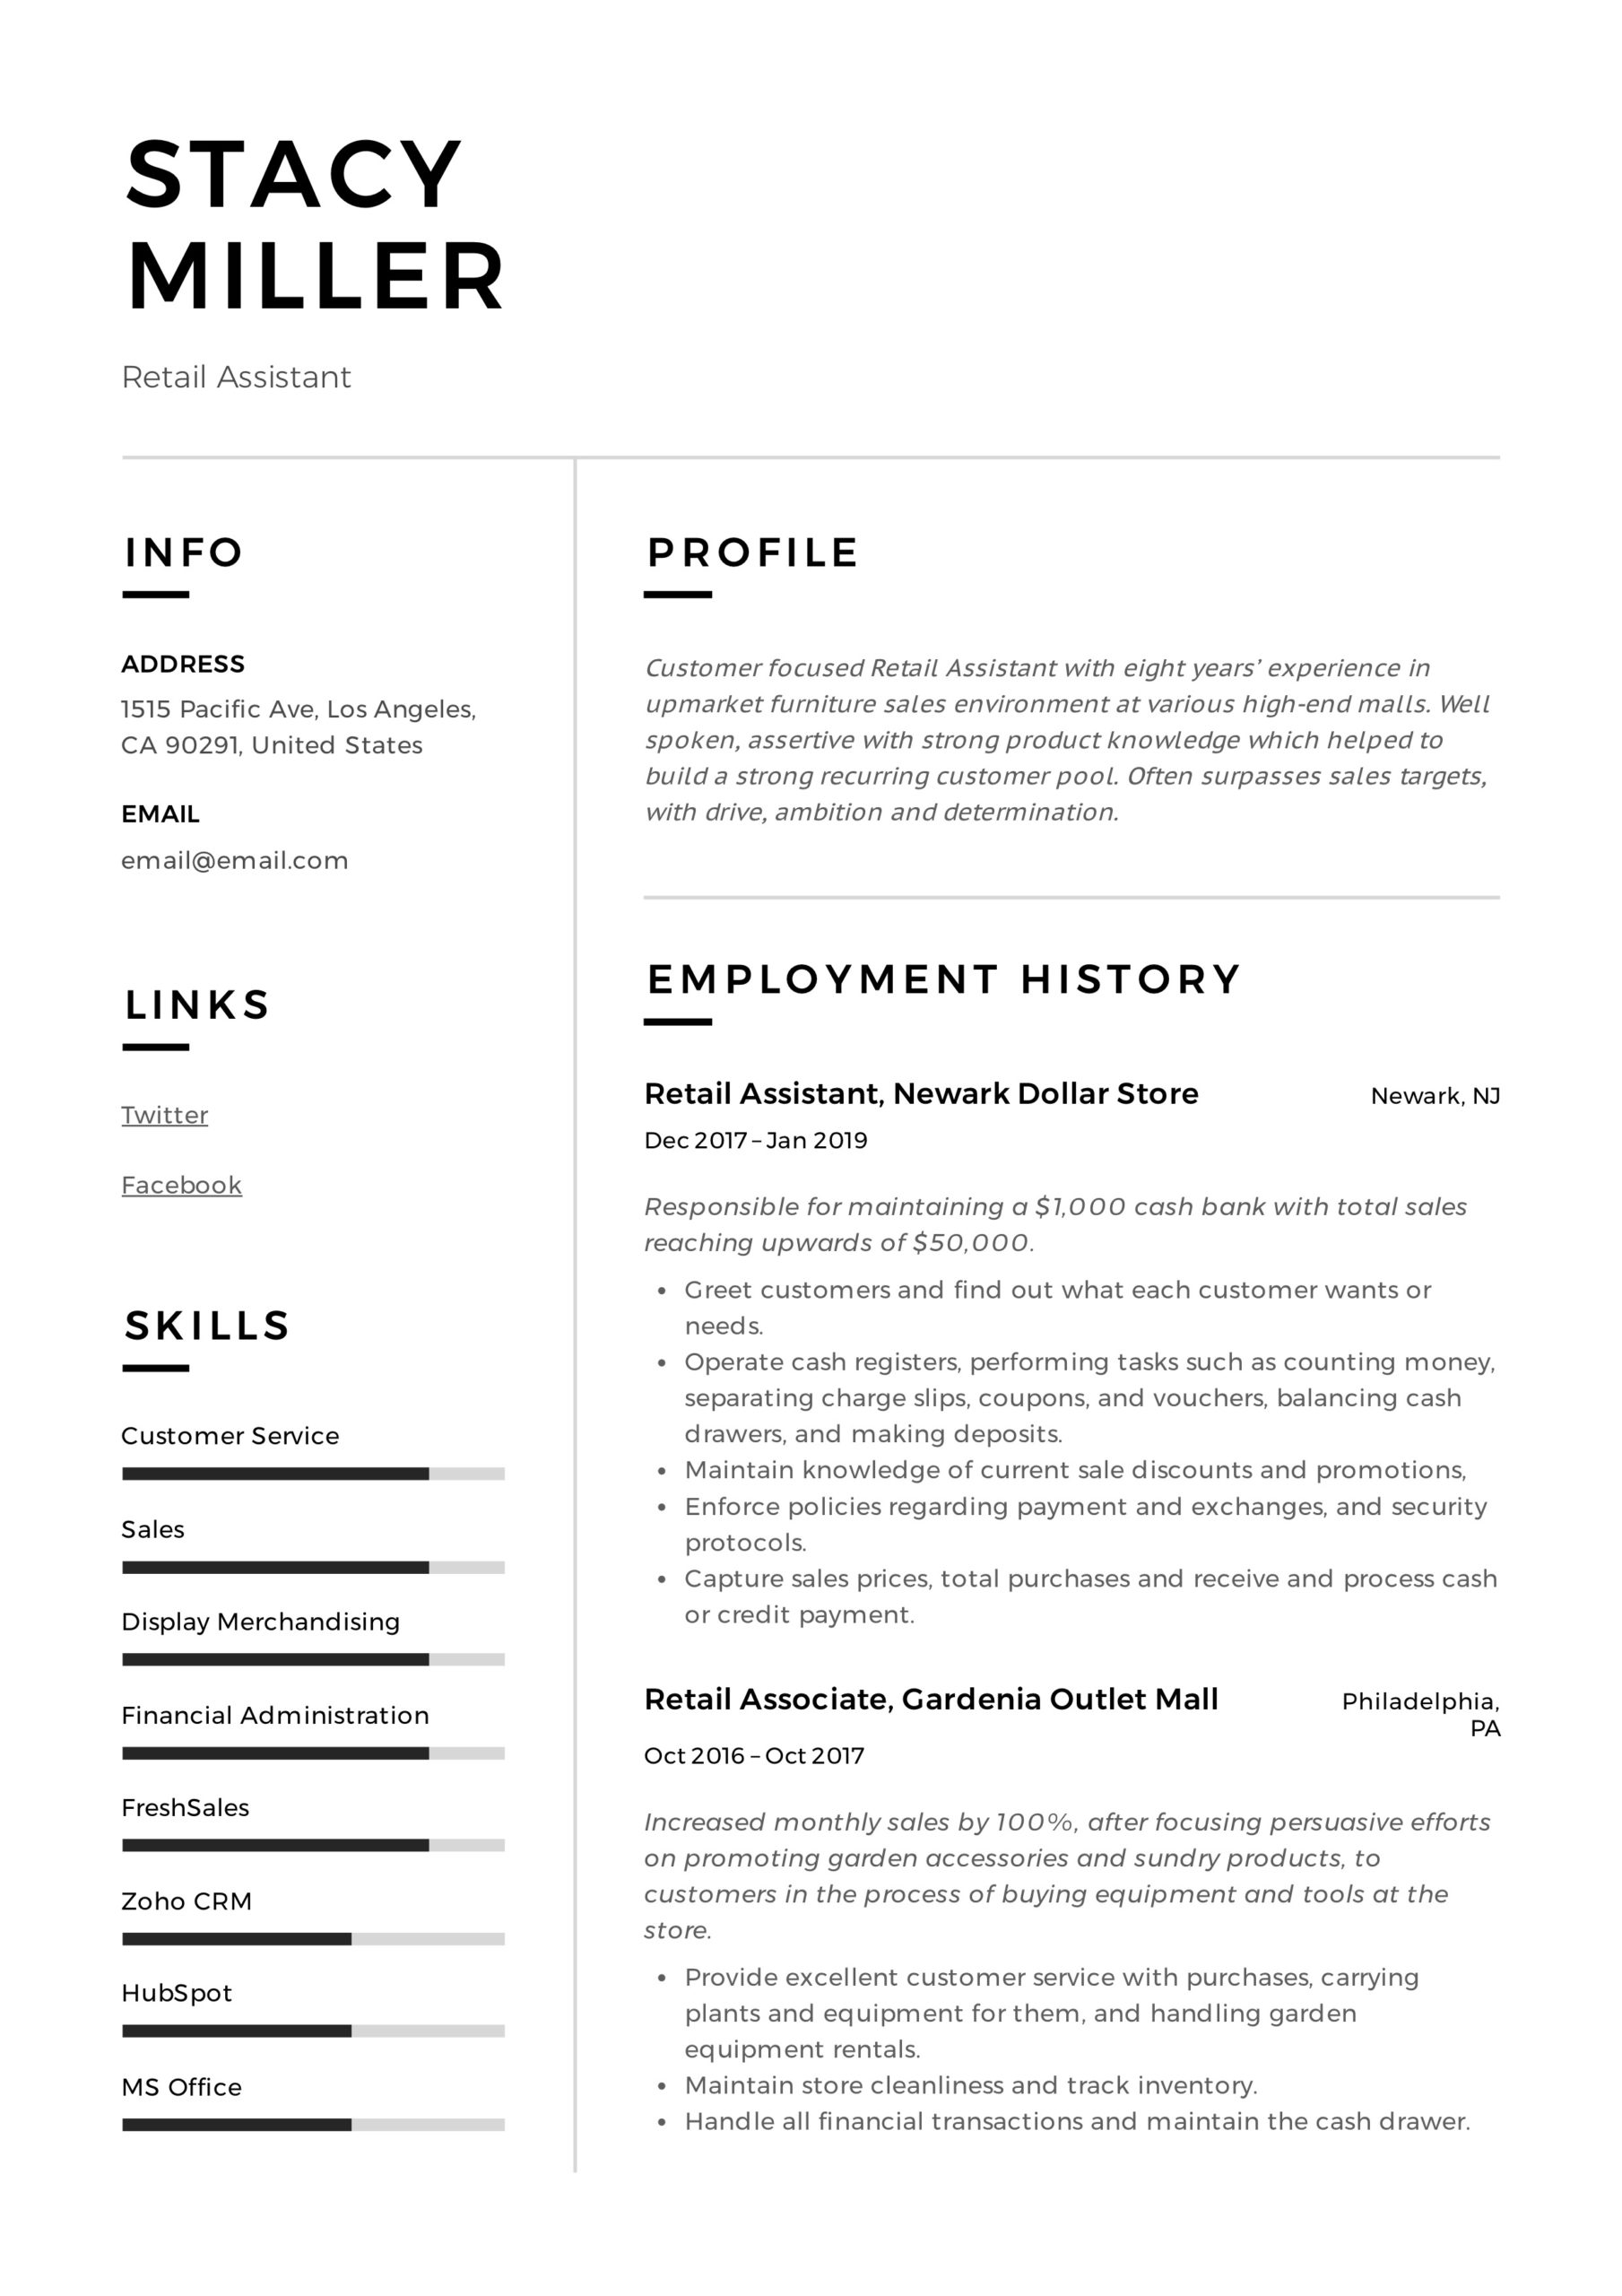 New Retail Management Resume Template